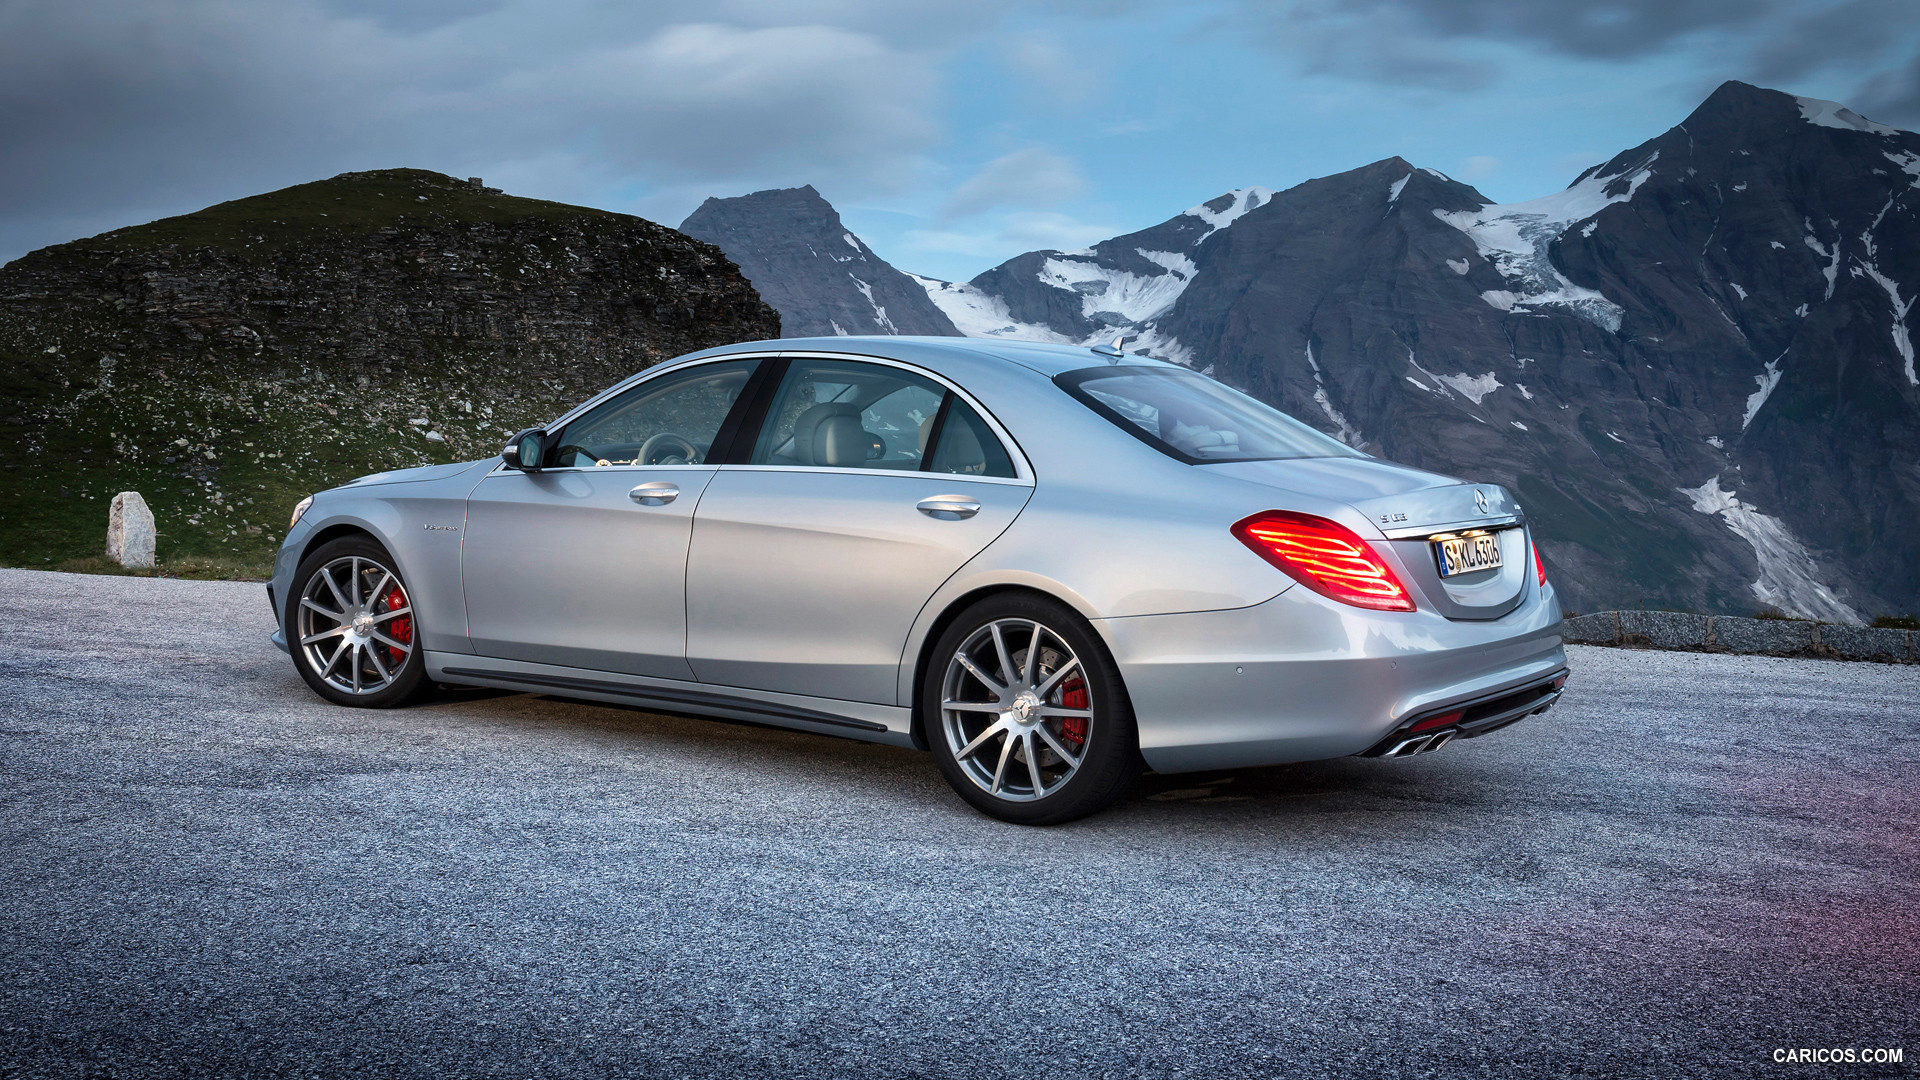 Mercedes-Benz S63 AMG W222 (2014)  - Side, #13 of 102